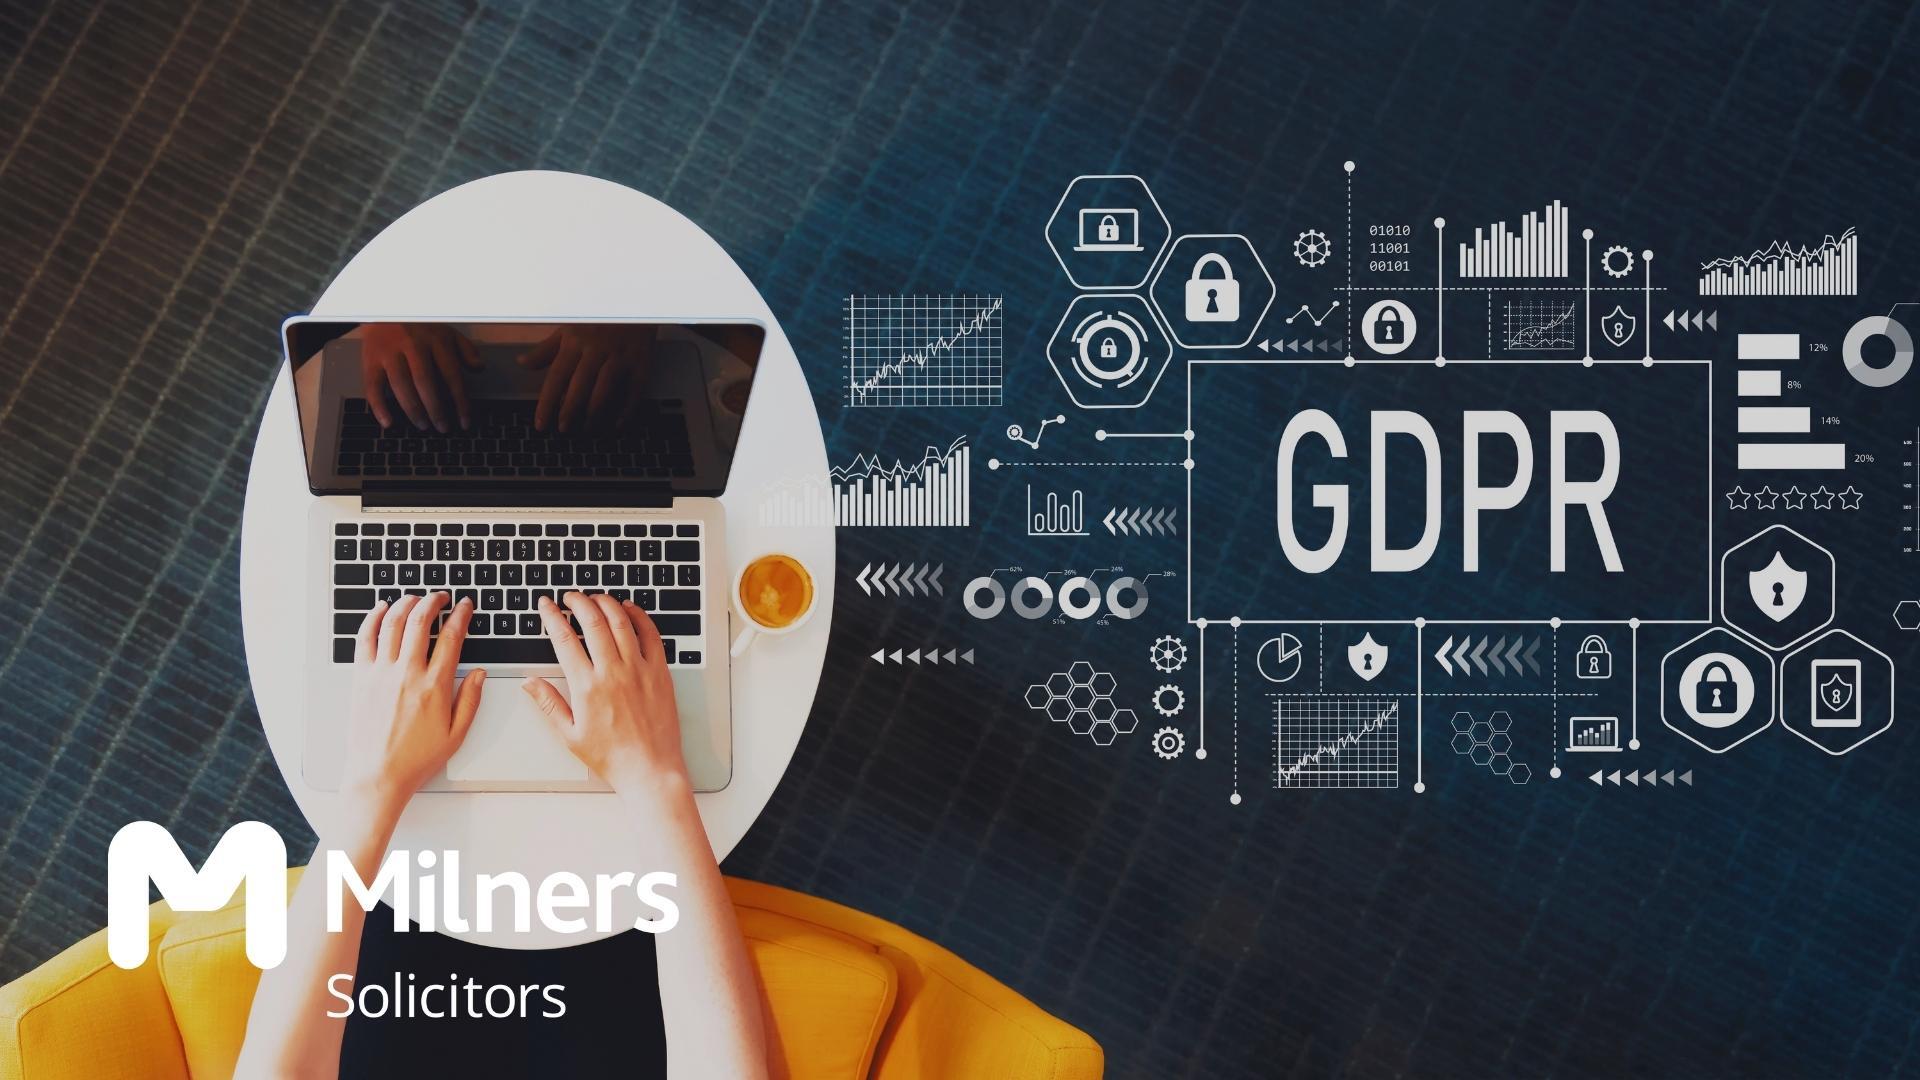 If you're in business, you'll be well aware of GDPR. But who are some of the big names to be fined for not complying with it?